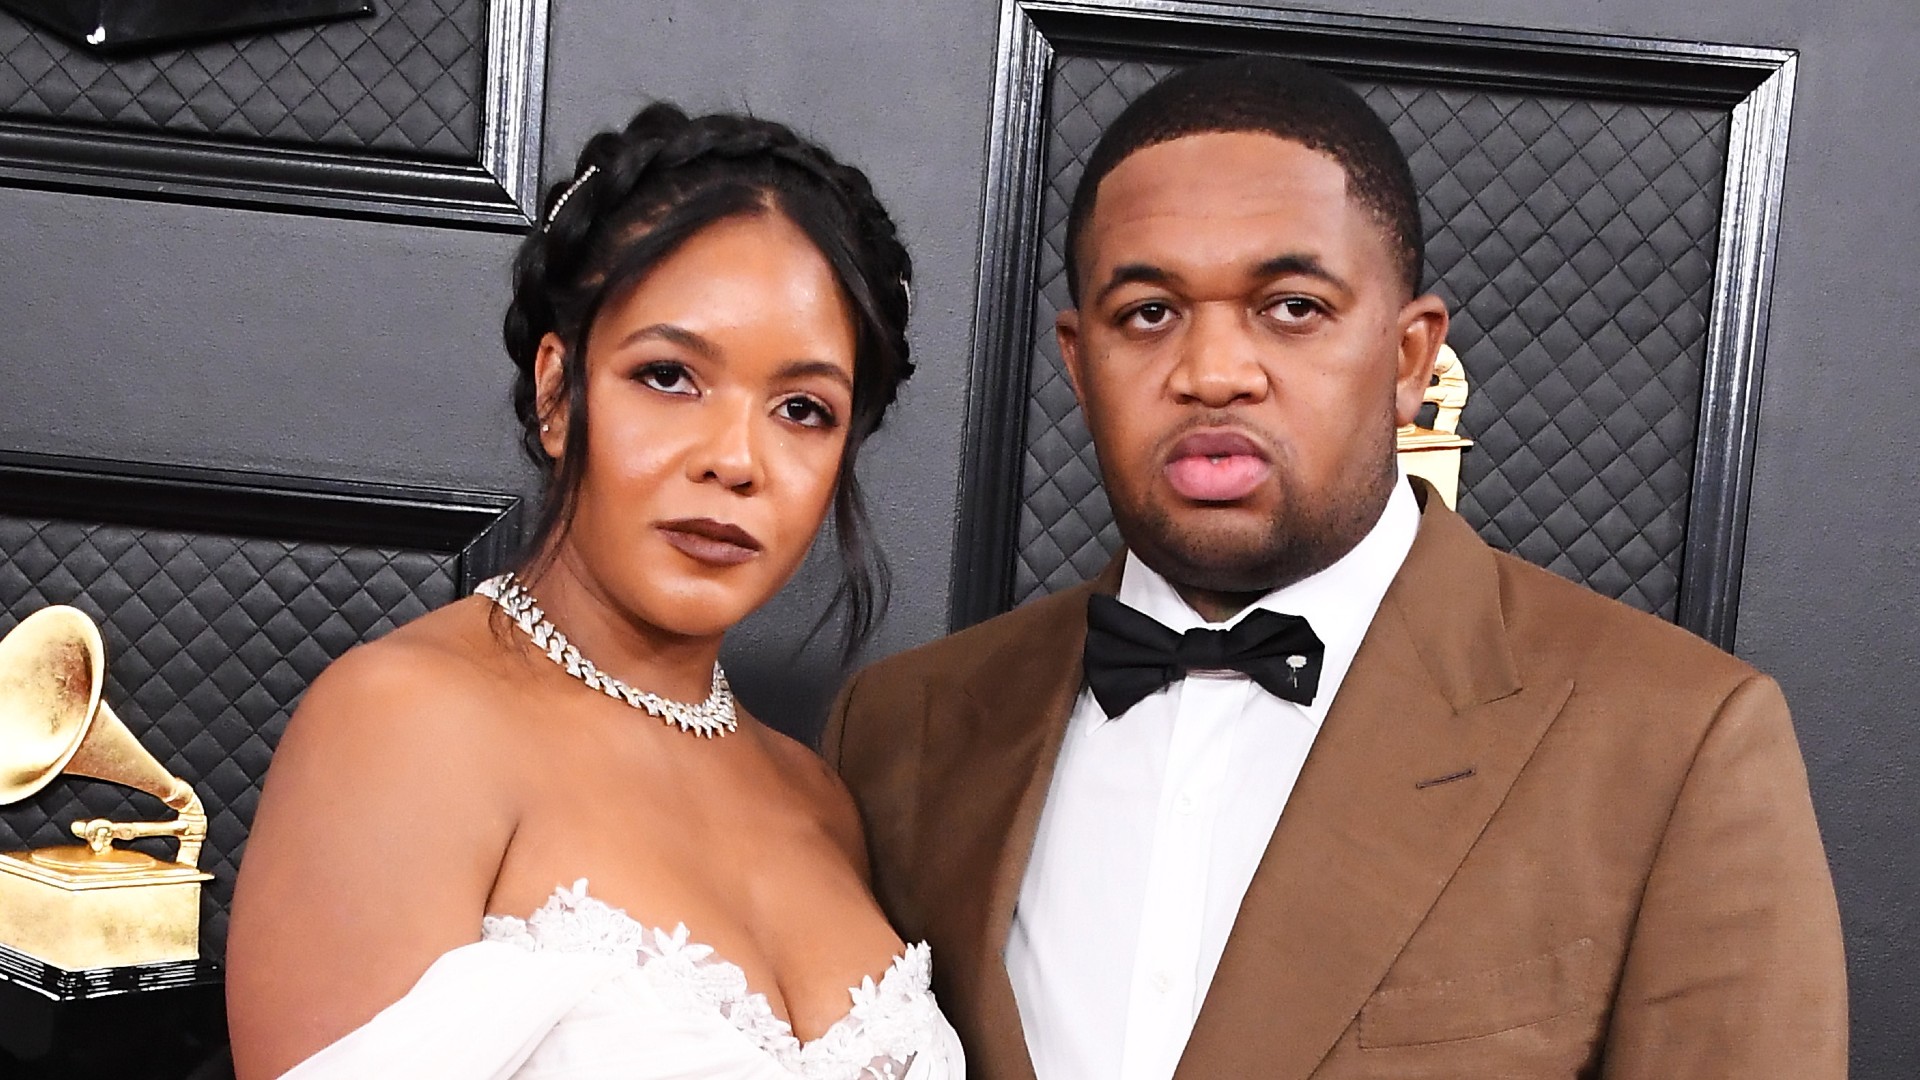 DJ Mustard Is Reportedly Seeking Sole Legal Custody Of 11-Year-Old Son Shared With Ex-Wife Chanel